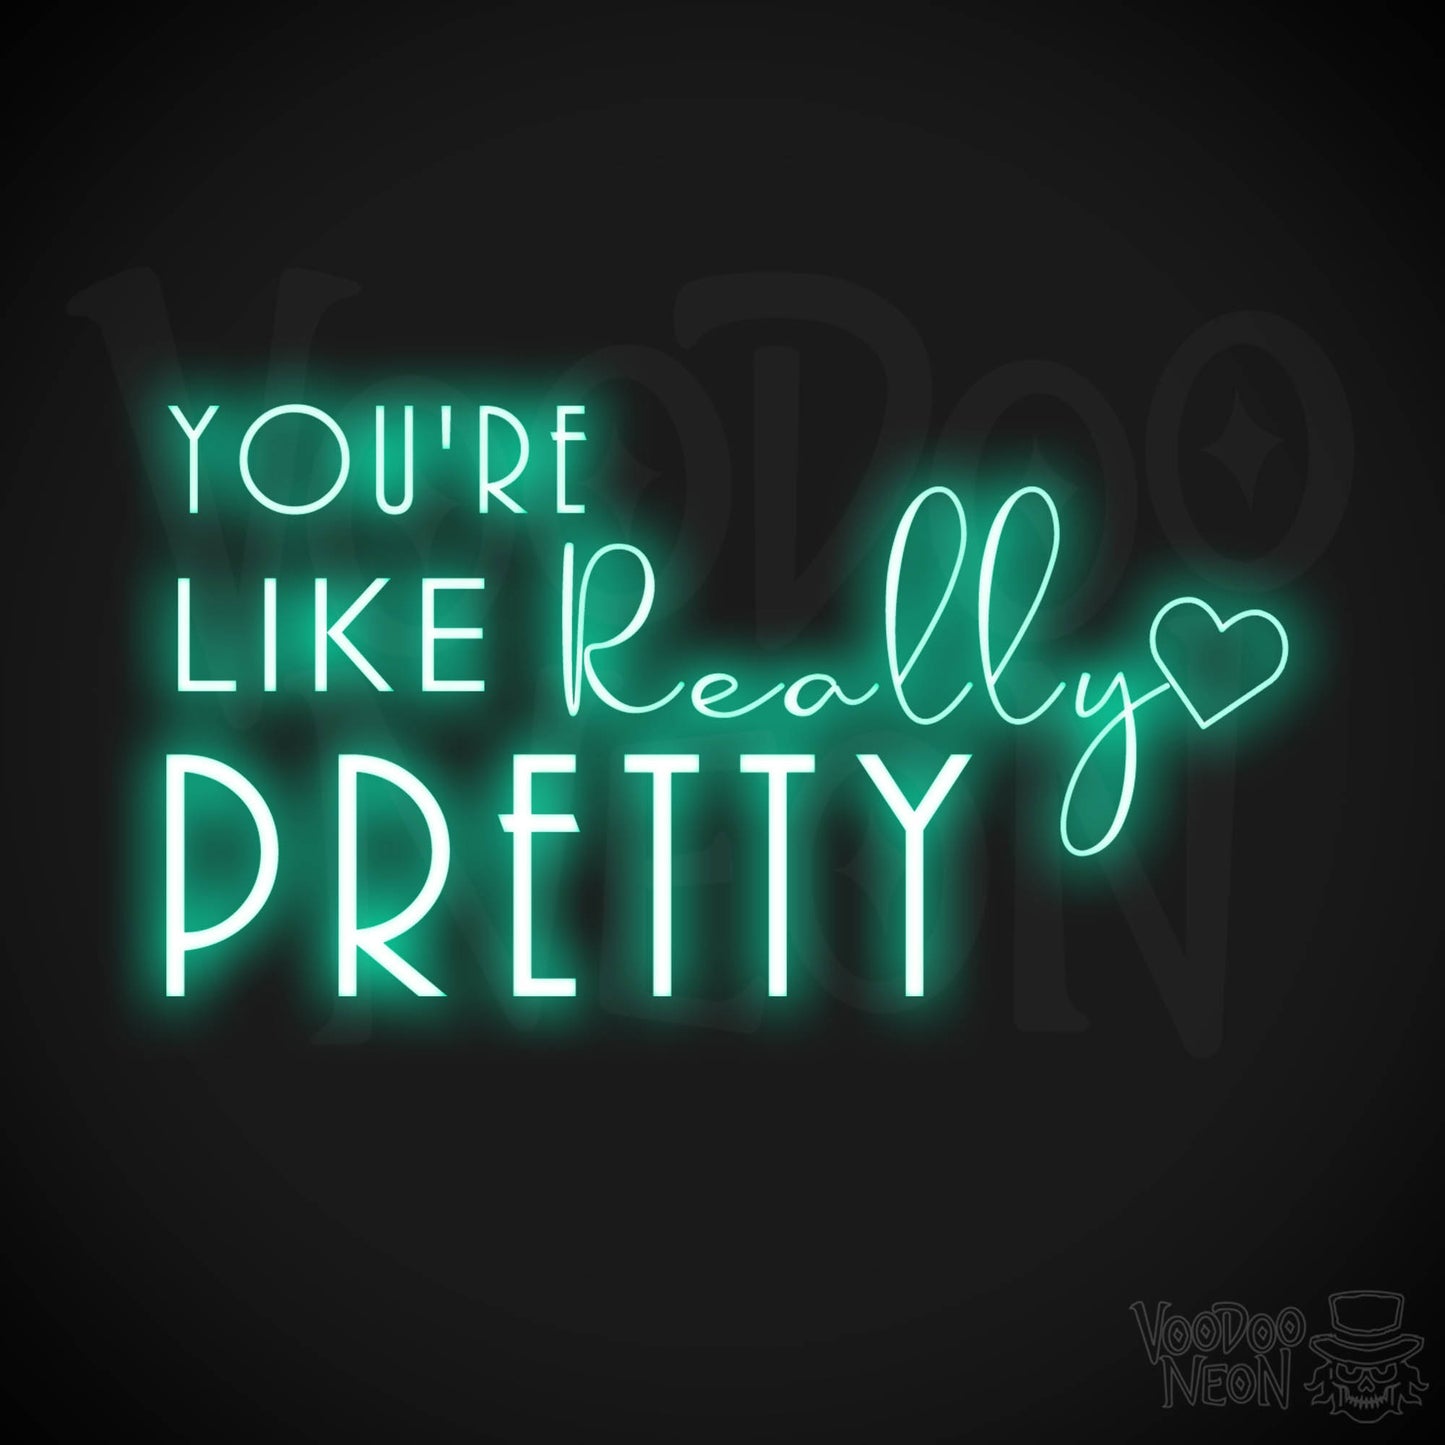 You're Like Really Pretty Neon Sign - Neon You're Like Really Pretty Sign - LED Wall Art - Color Light Green